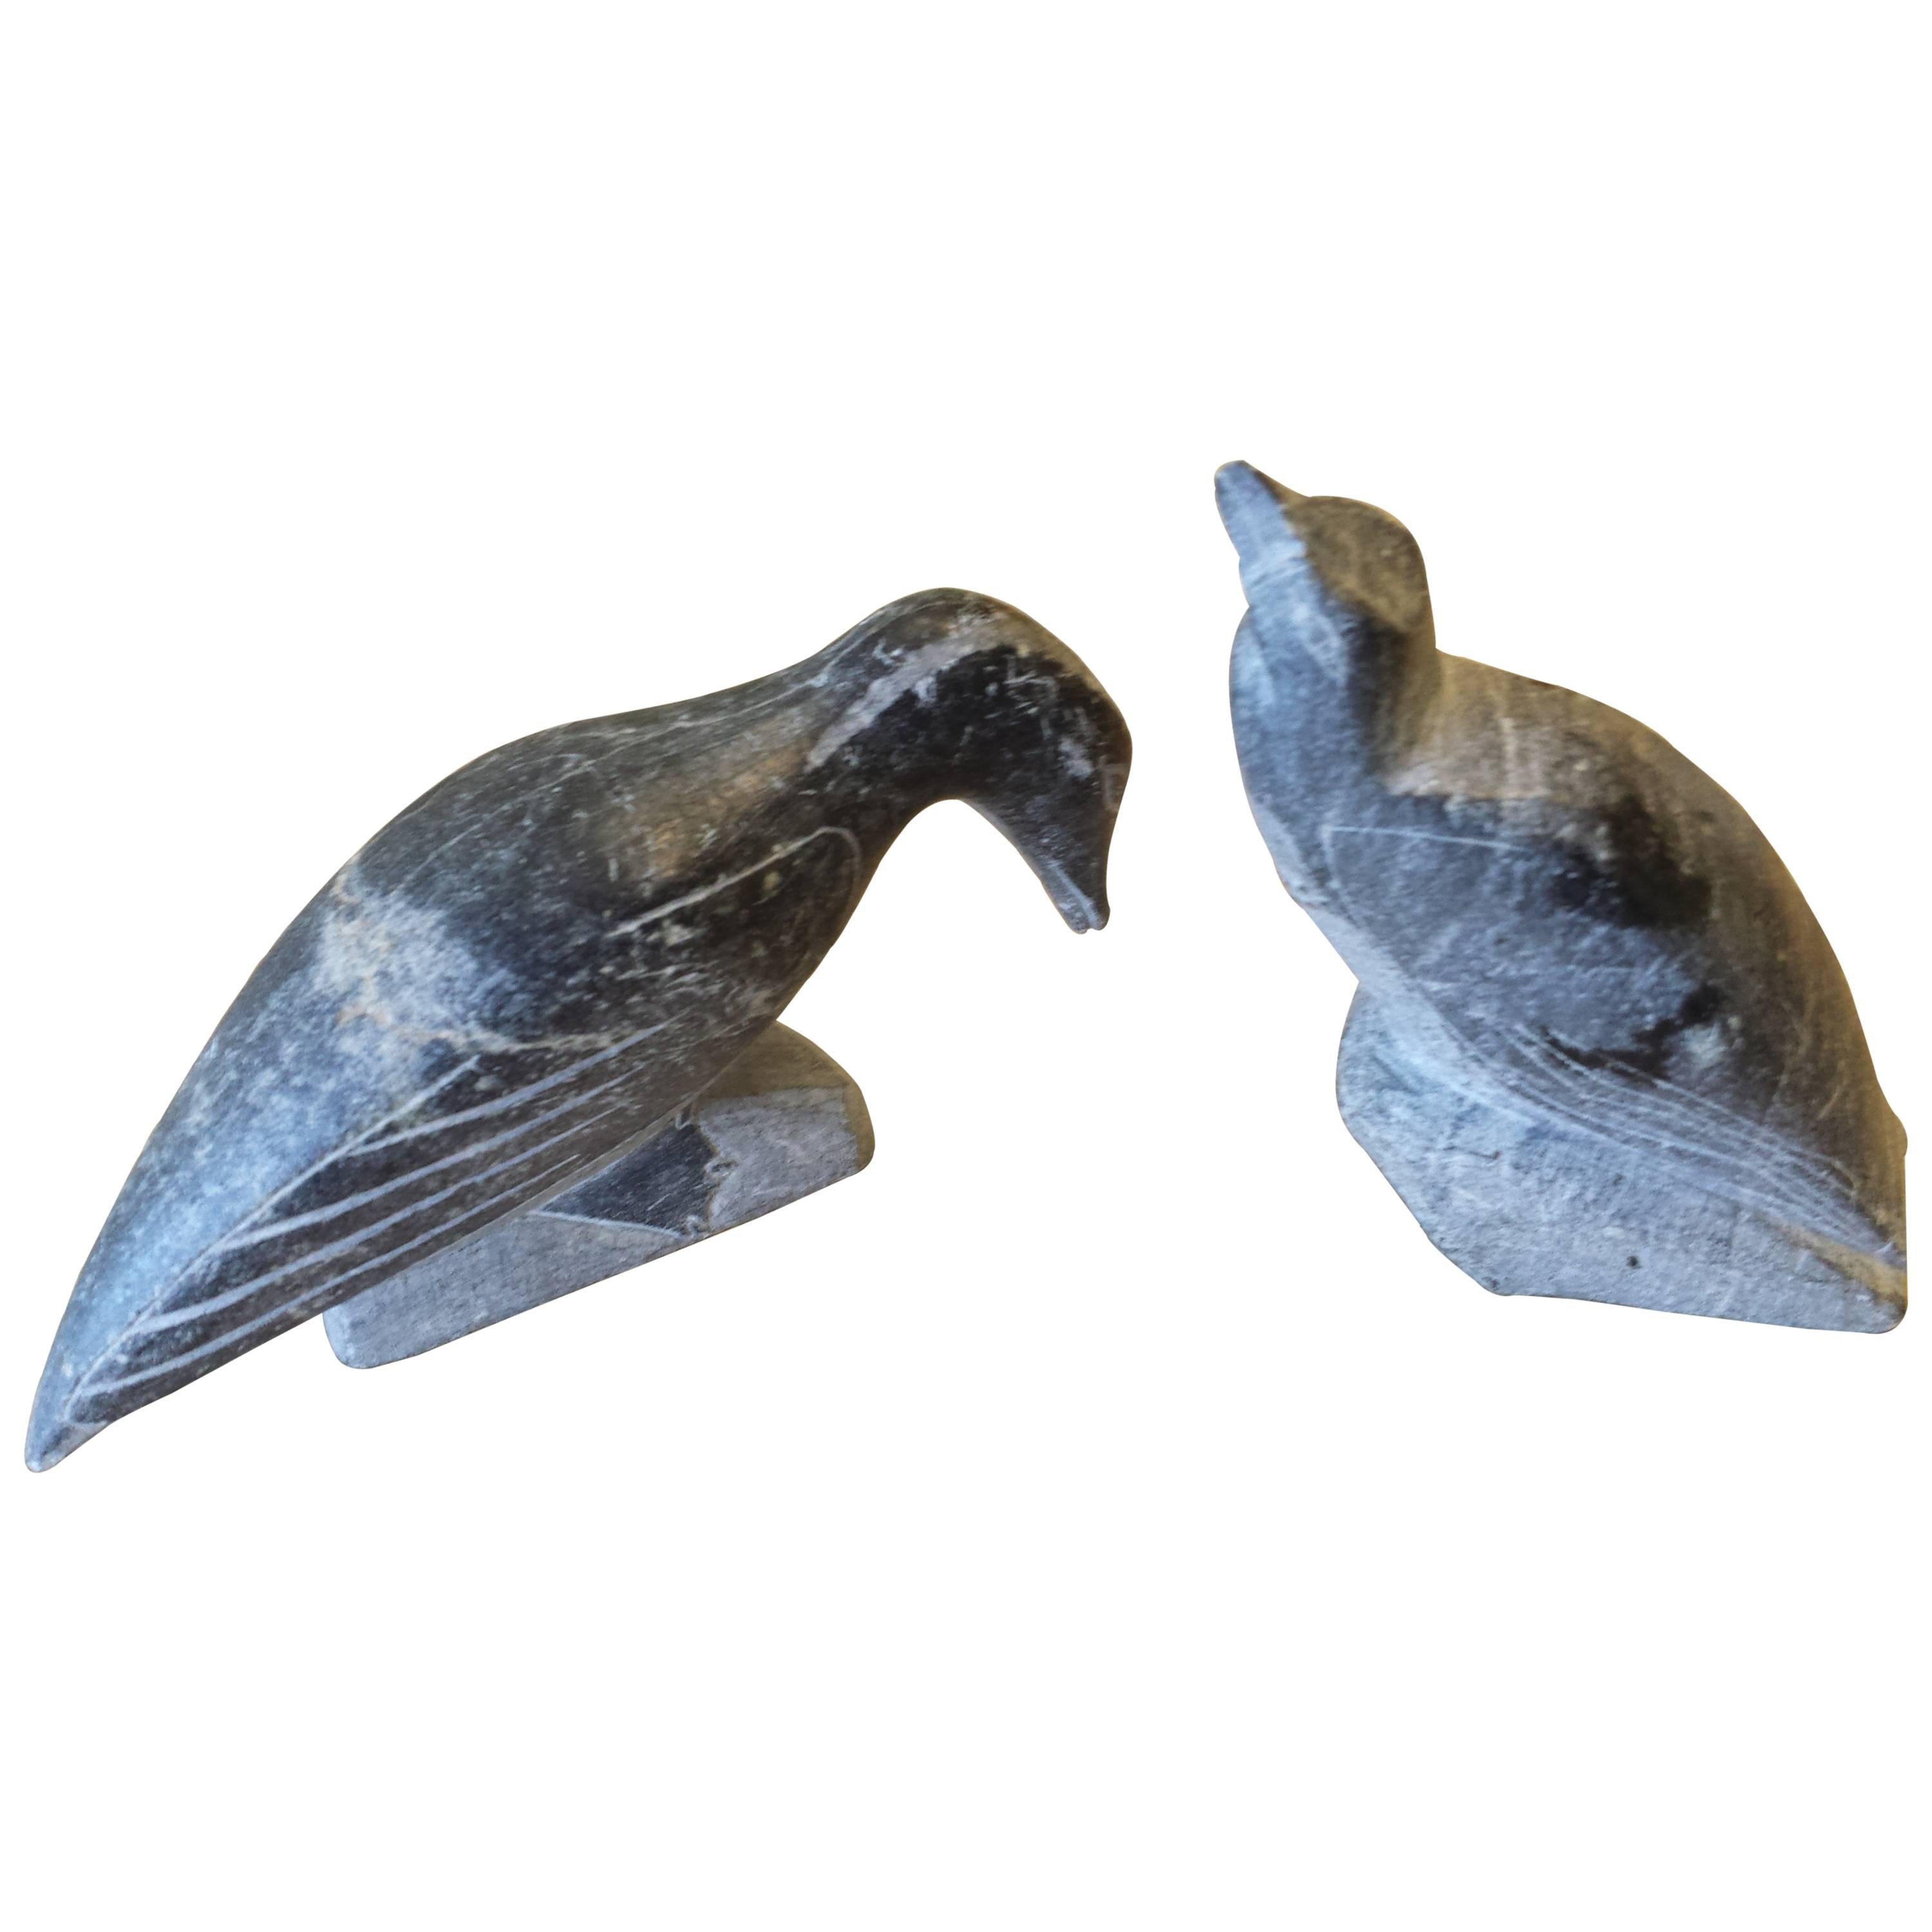 Pr. of Soapstone Sculptures Inuit Birds Signed Syllabics E Number for Carver ID.